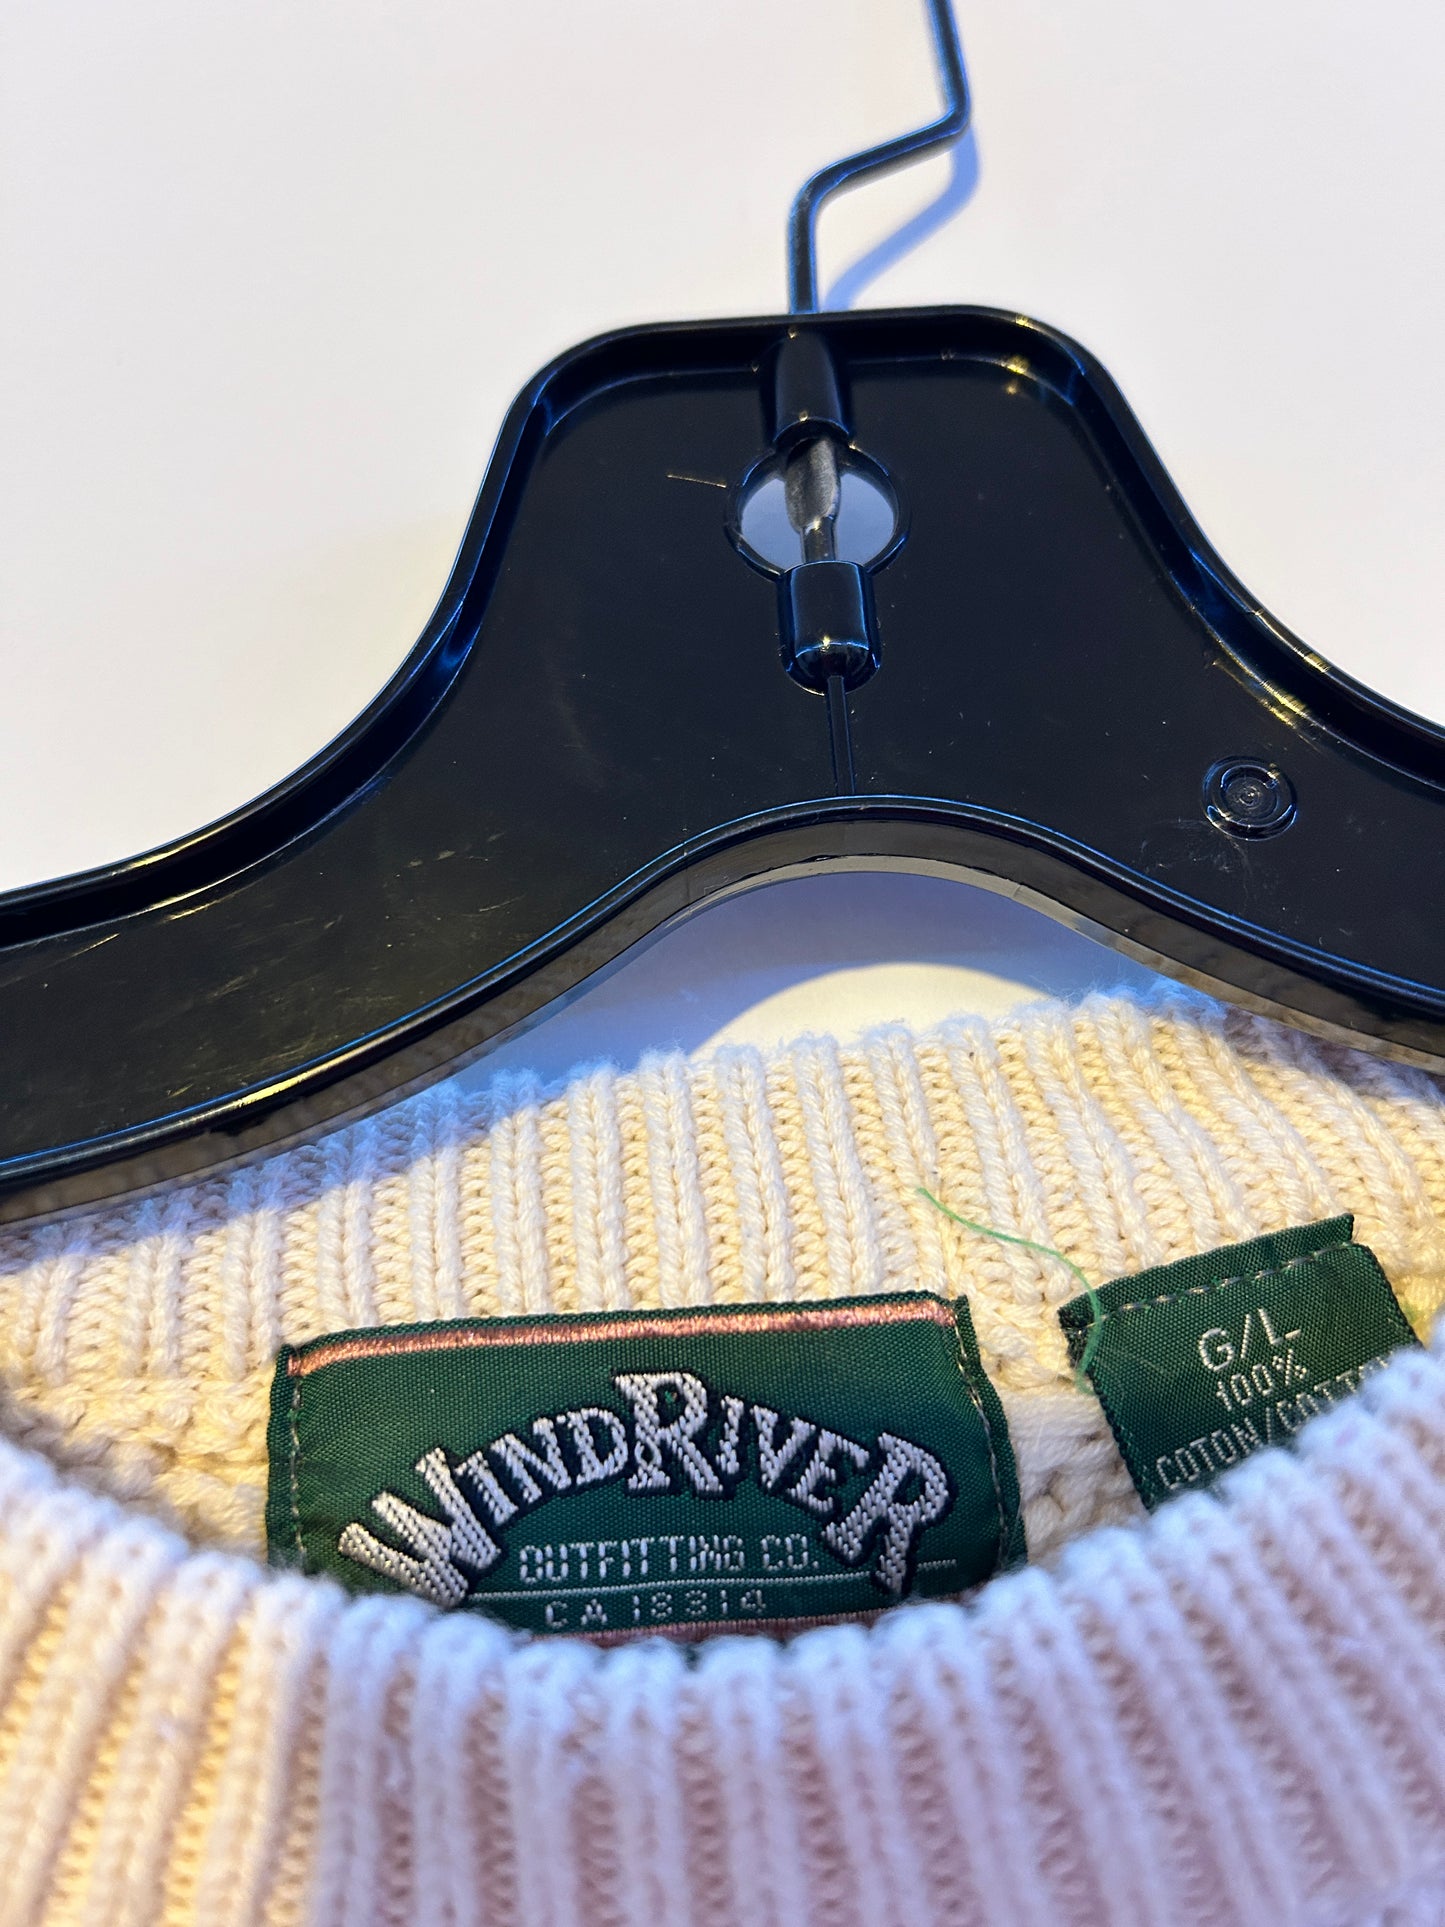 Windriver Cable Knit Sweater (L)